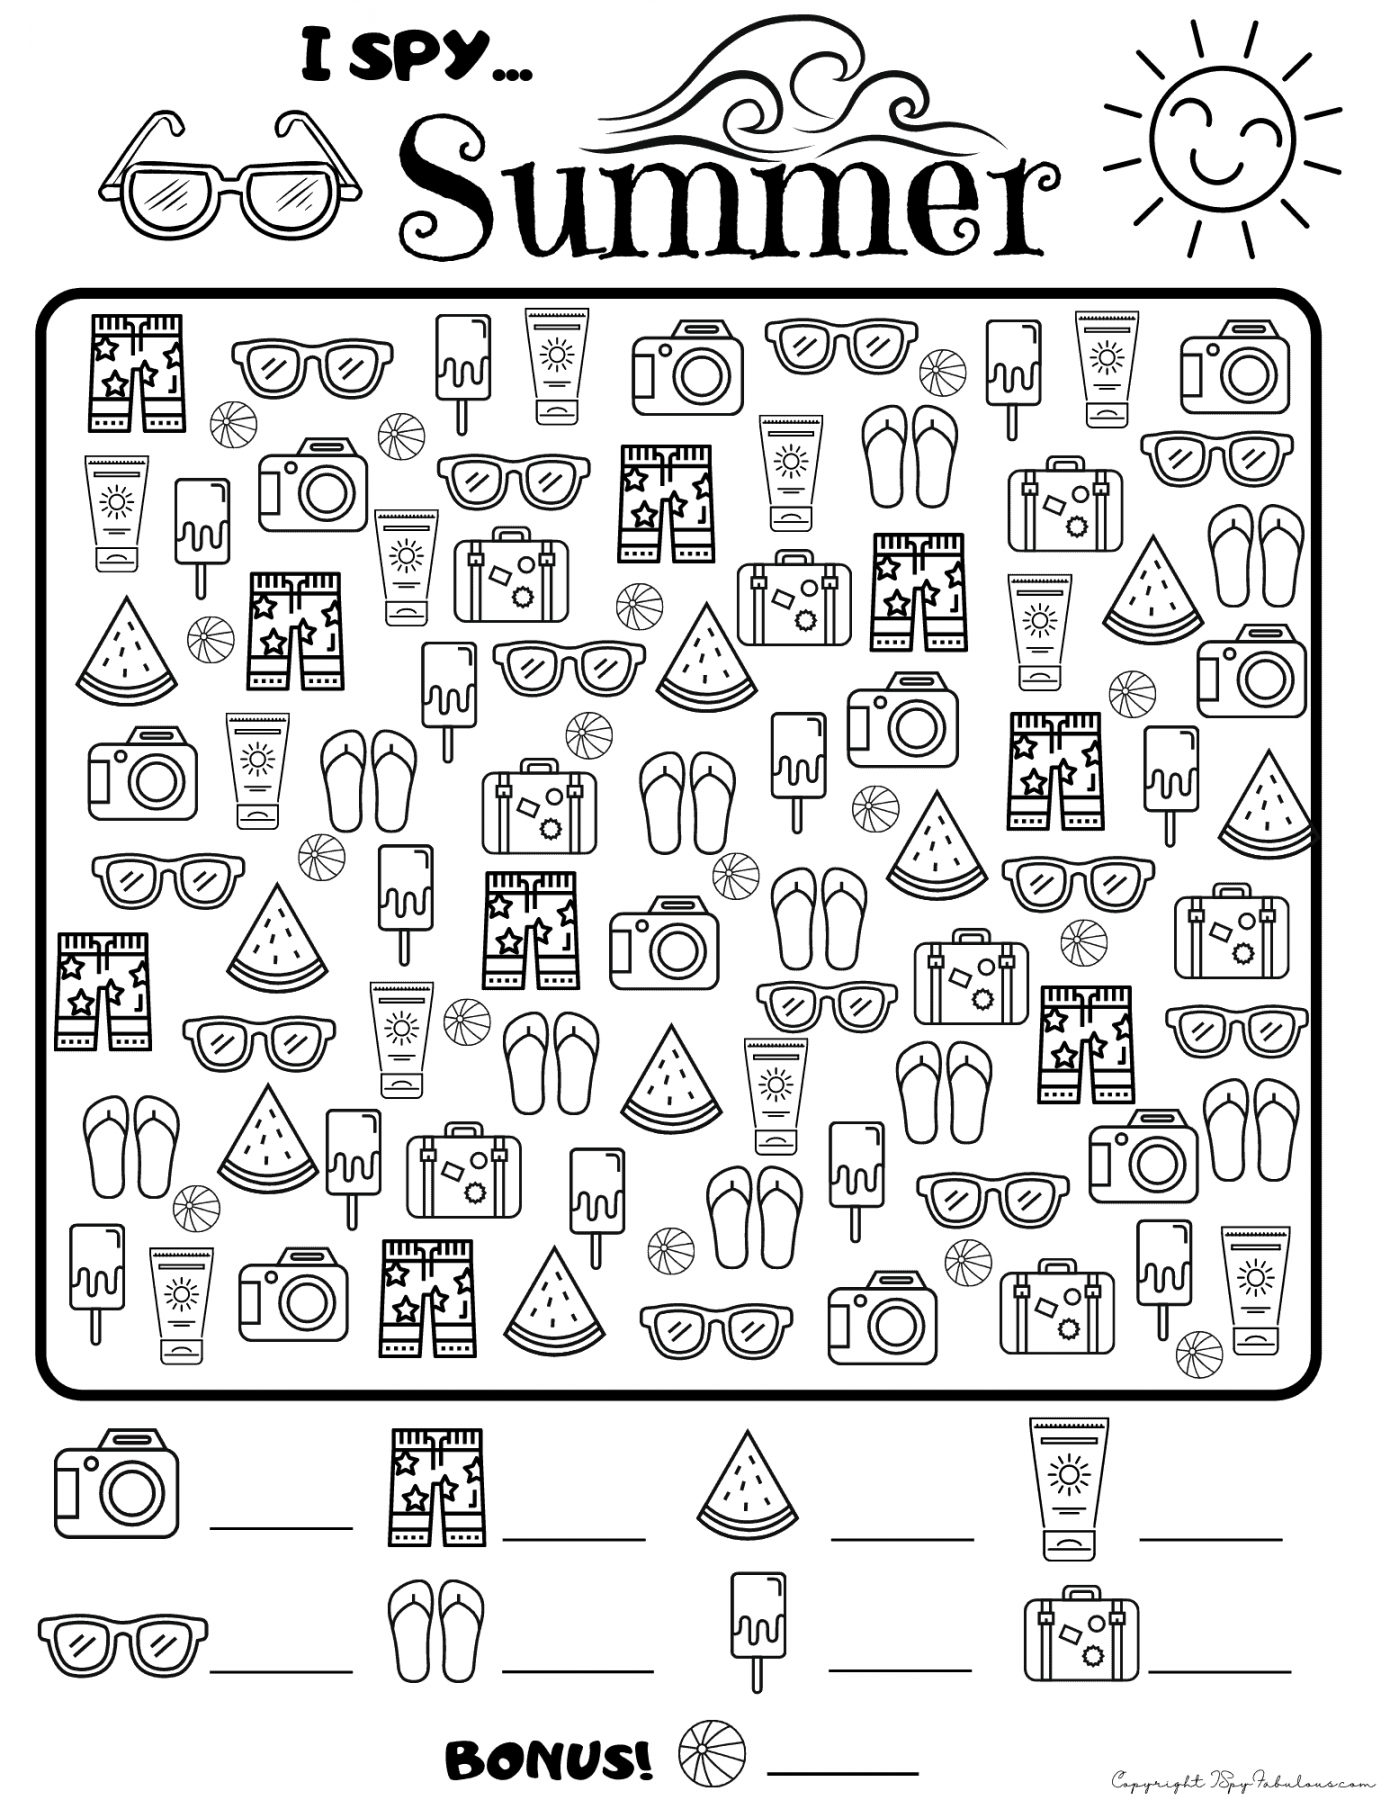 Free I Spy Printable - Printable - Free Printable I Spy Summer Coloring Page - I Spy Fabulous